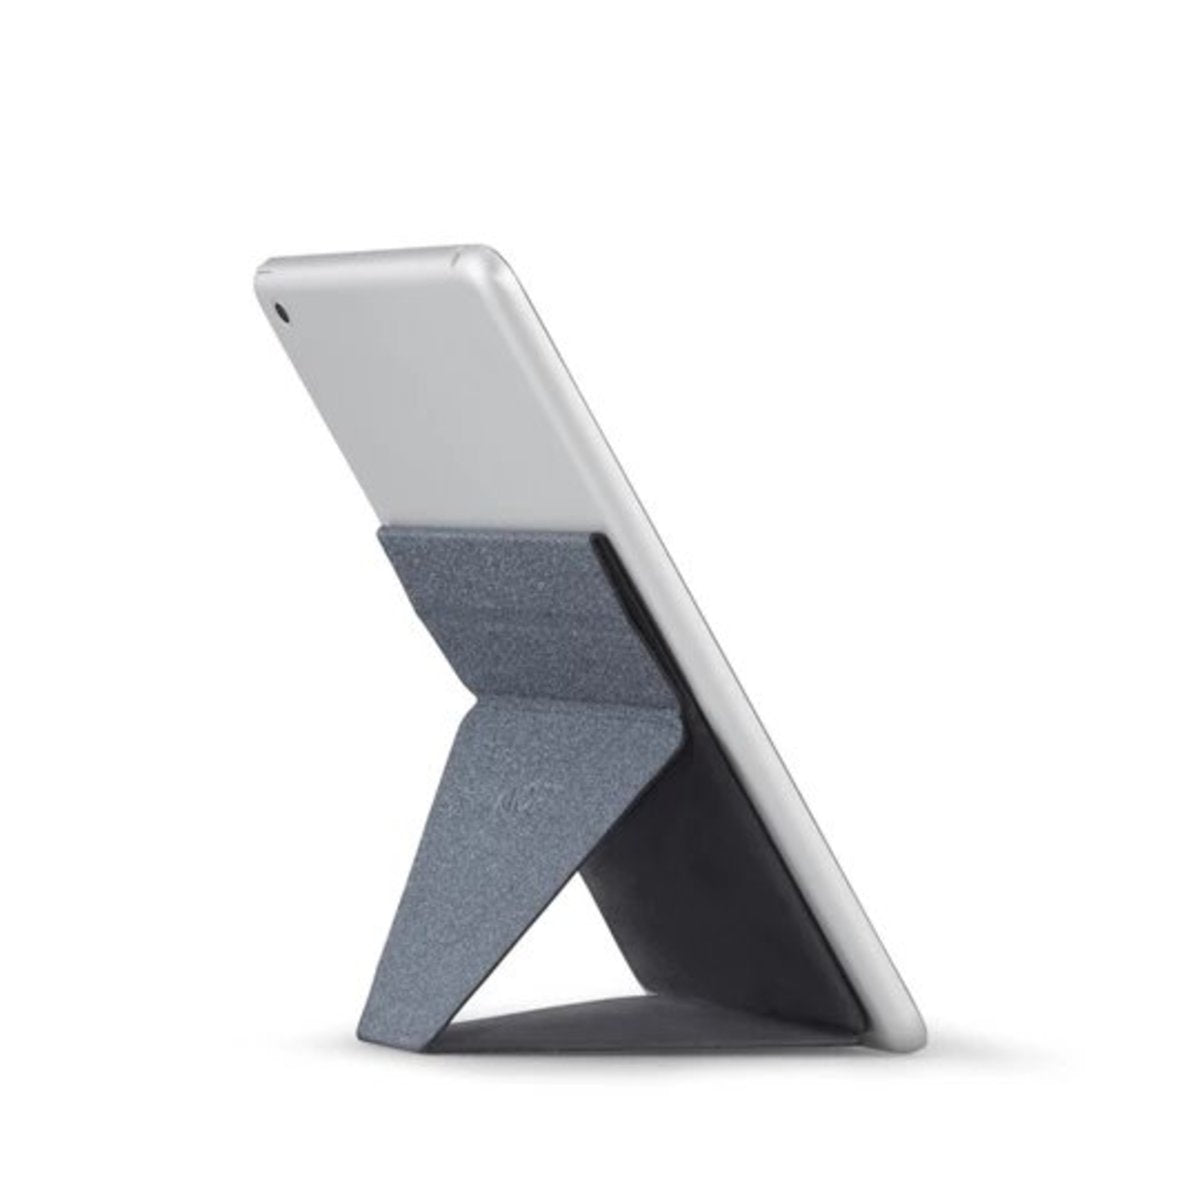 MOFT - USA MOFT X - Foldable invisible stand - small tablet (7.9")